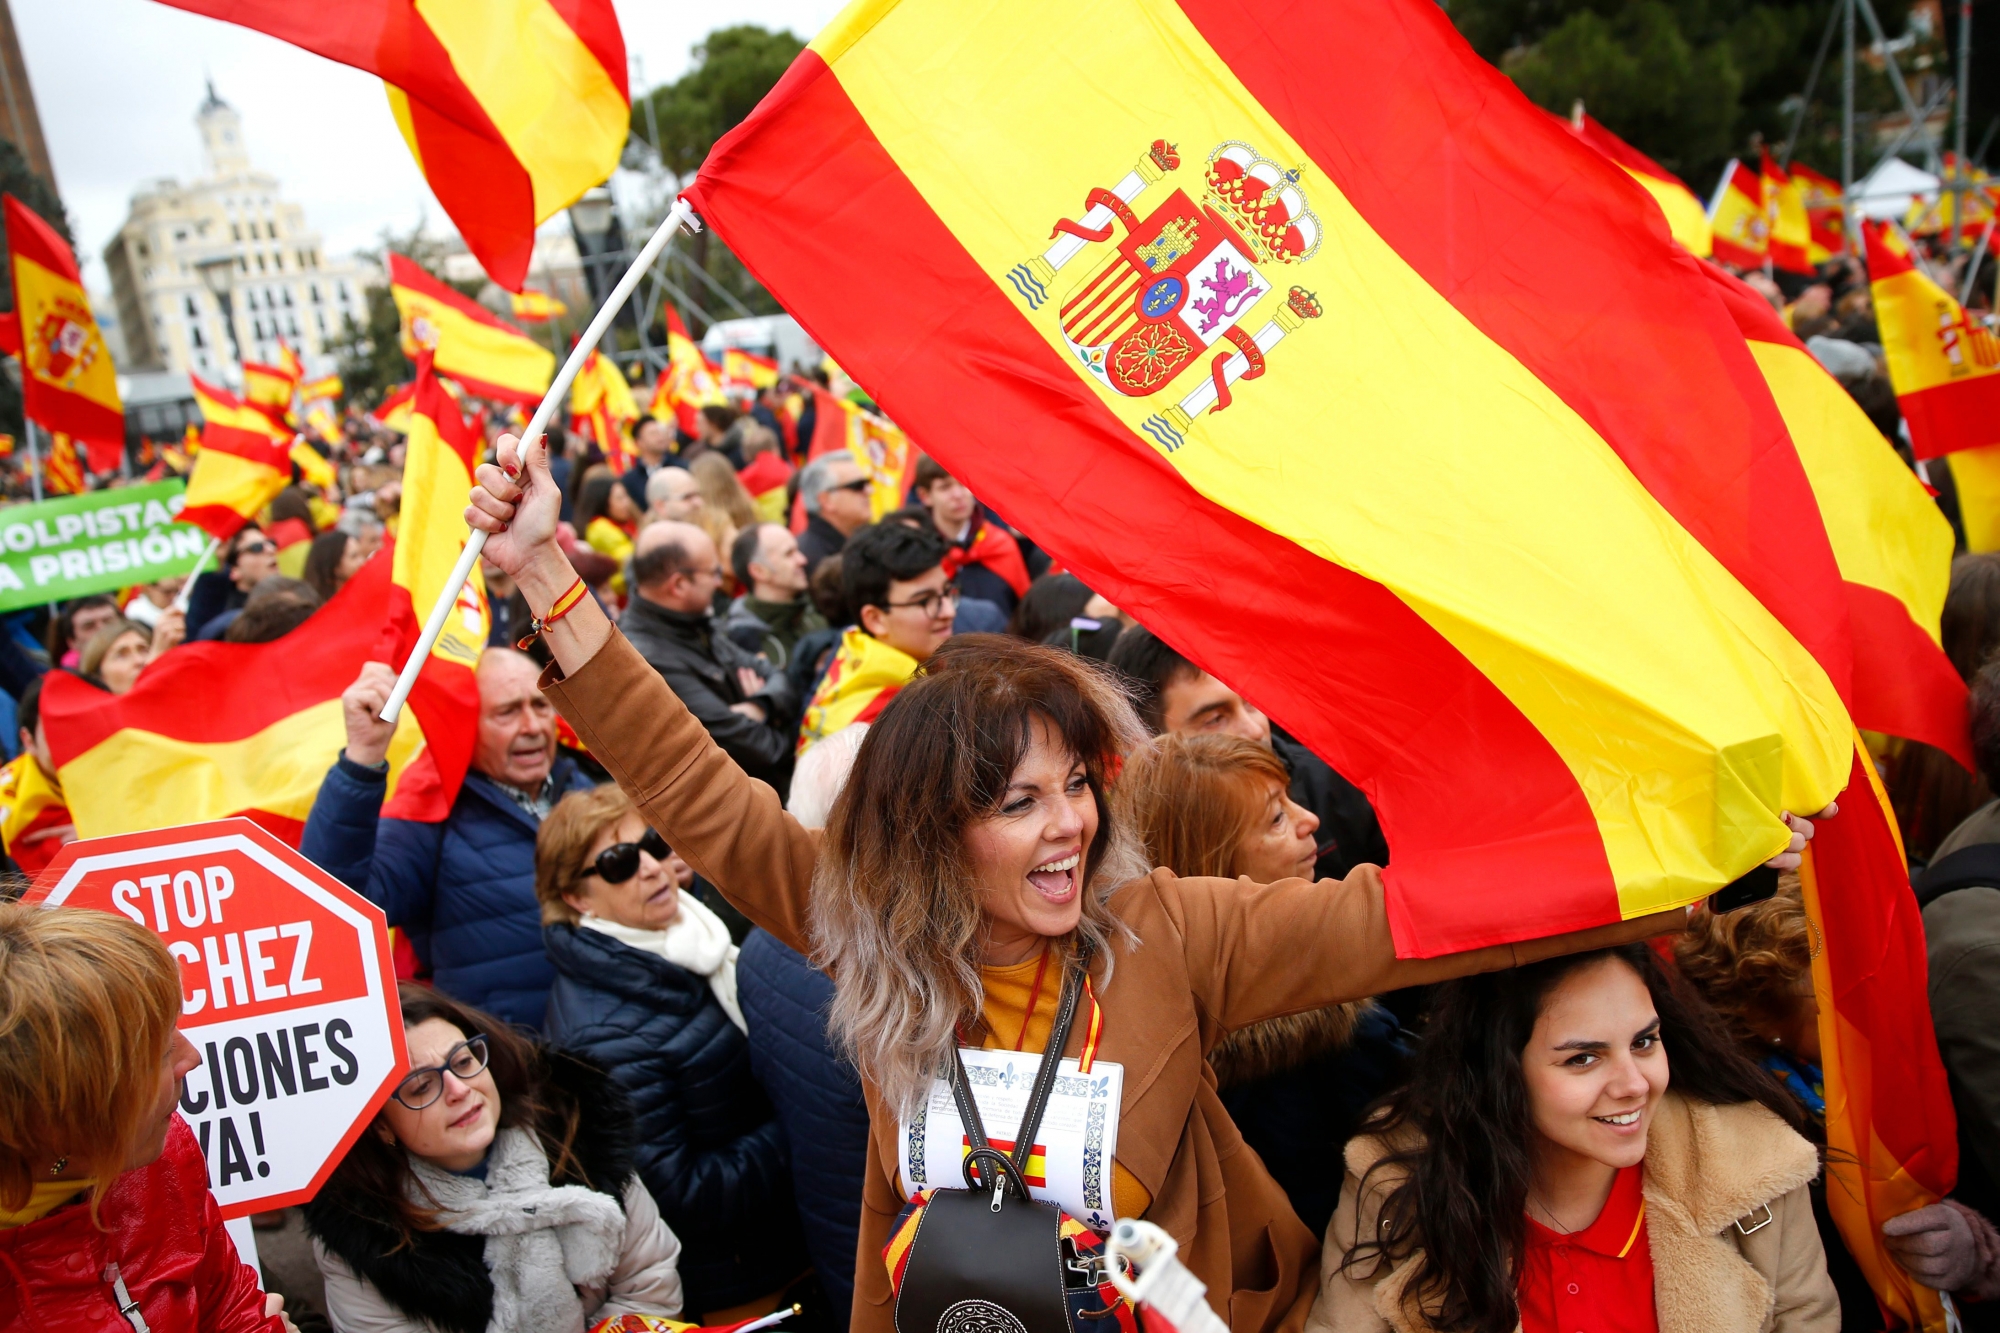 Demonstrators wave Spanish flags during a protest in Madrid, Spain, on Sunday, Feb.10, 2019. Thousands of Spaniards in Madrid are joining a rally called by right-wing political parties to demand that Socialist Prime Minister Pedro Sanchez step down. Banner reads in Spanish "coup leaders must go to the prison". (AP Photo/Andrea Comas) Spain Politics